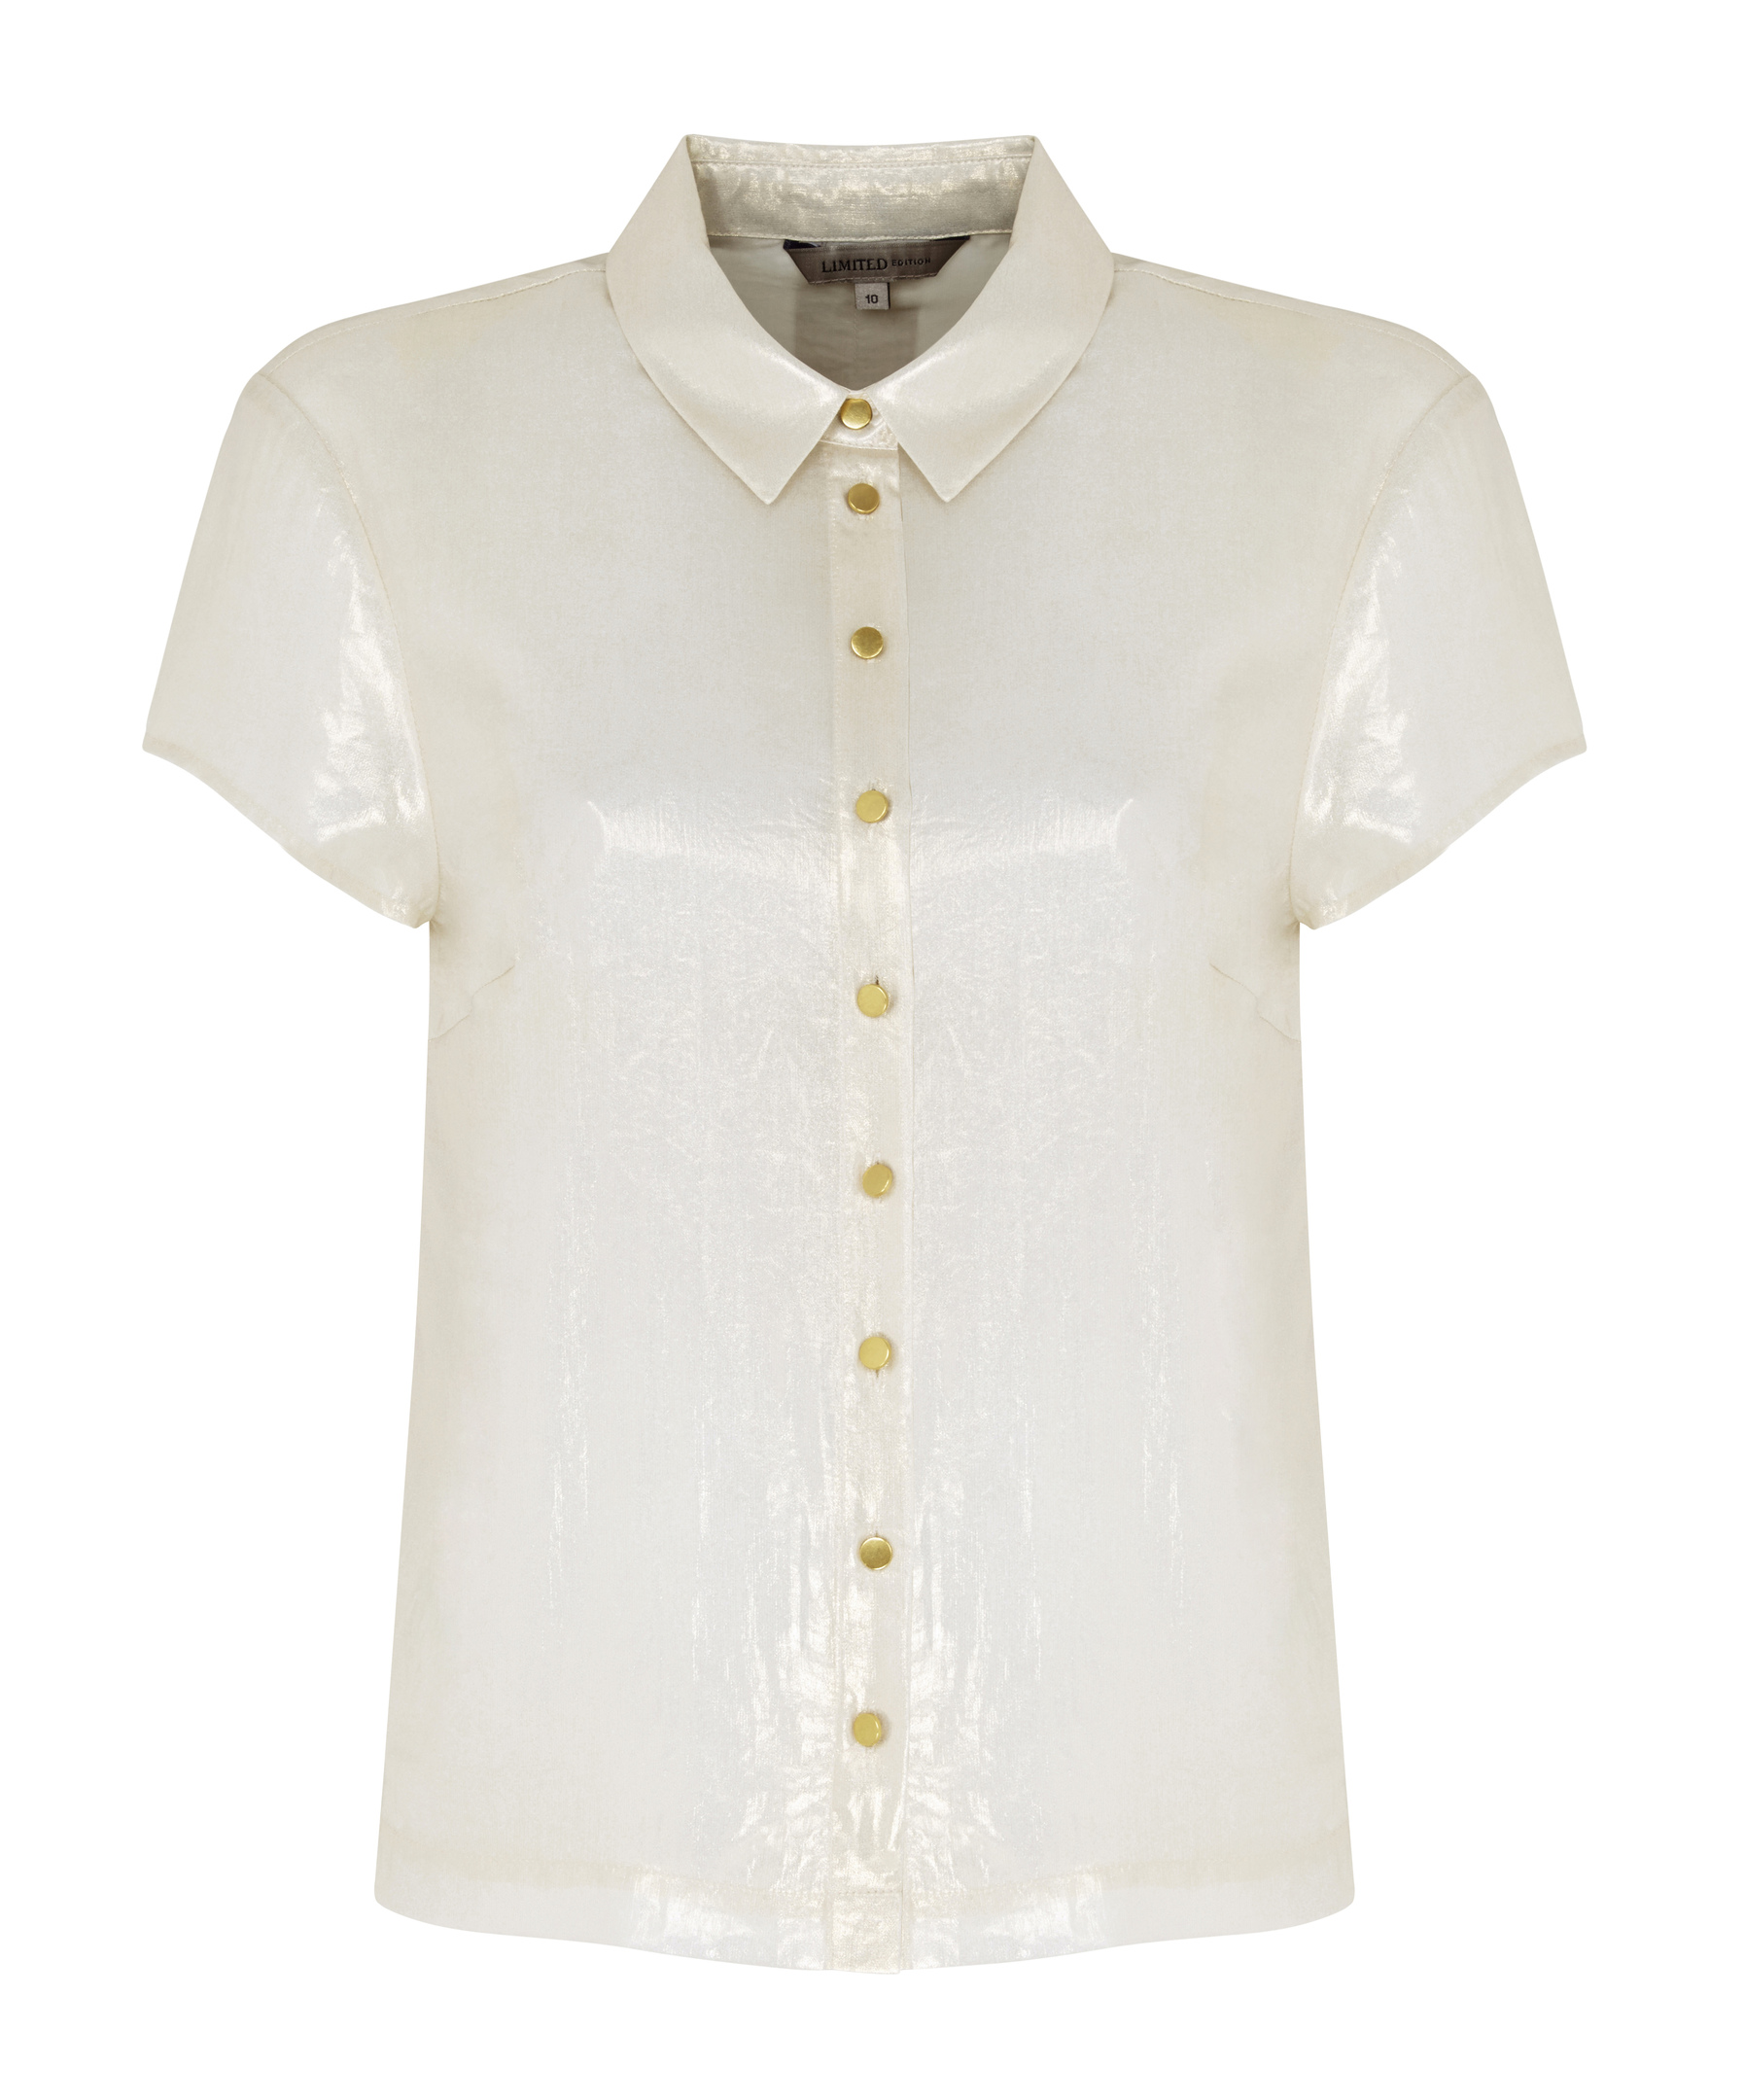 Limited Edition Metallic Blouse £29.50